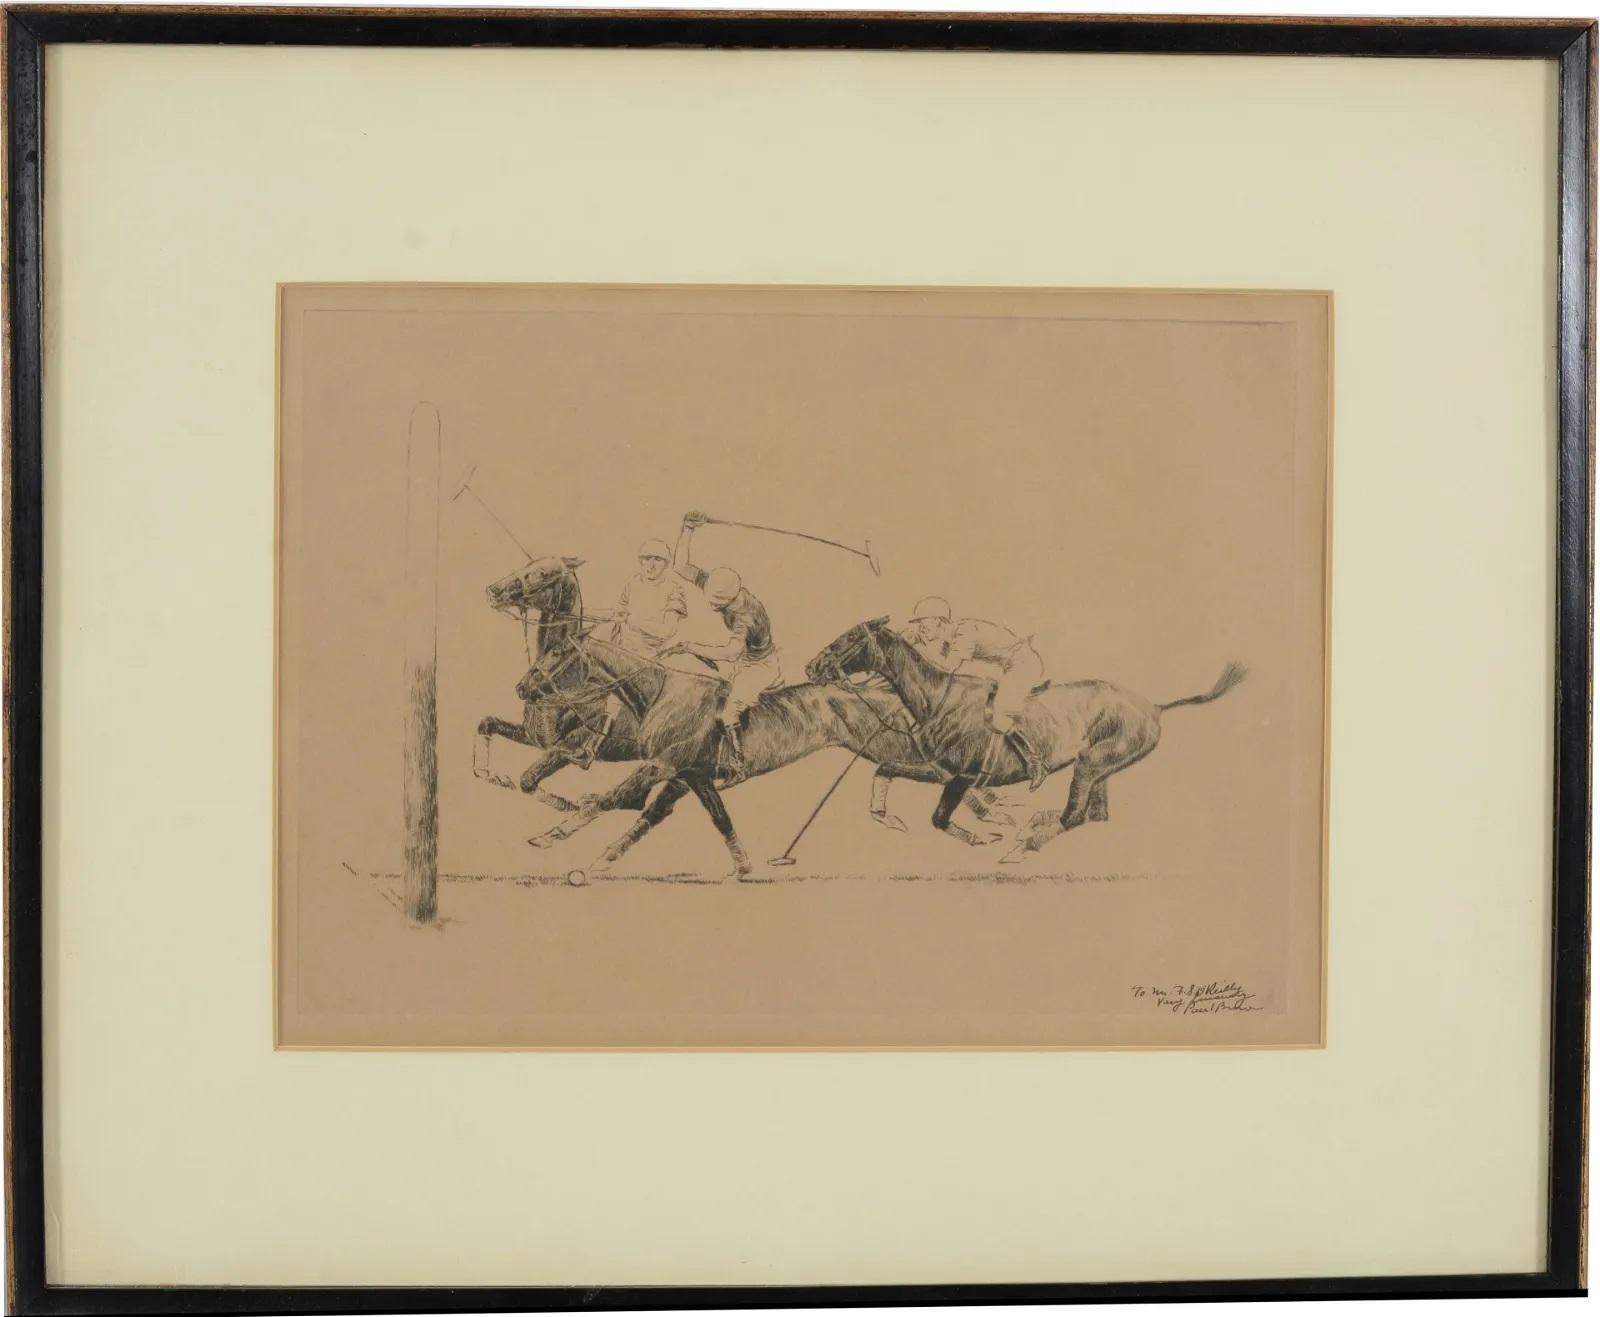 "Paul Brown 3 Polo Players Attacking Goal Drypoint Etching"